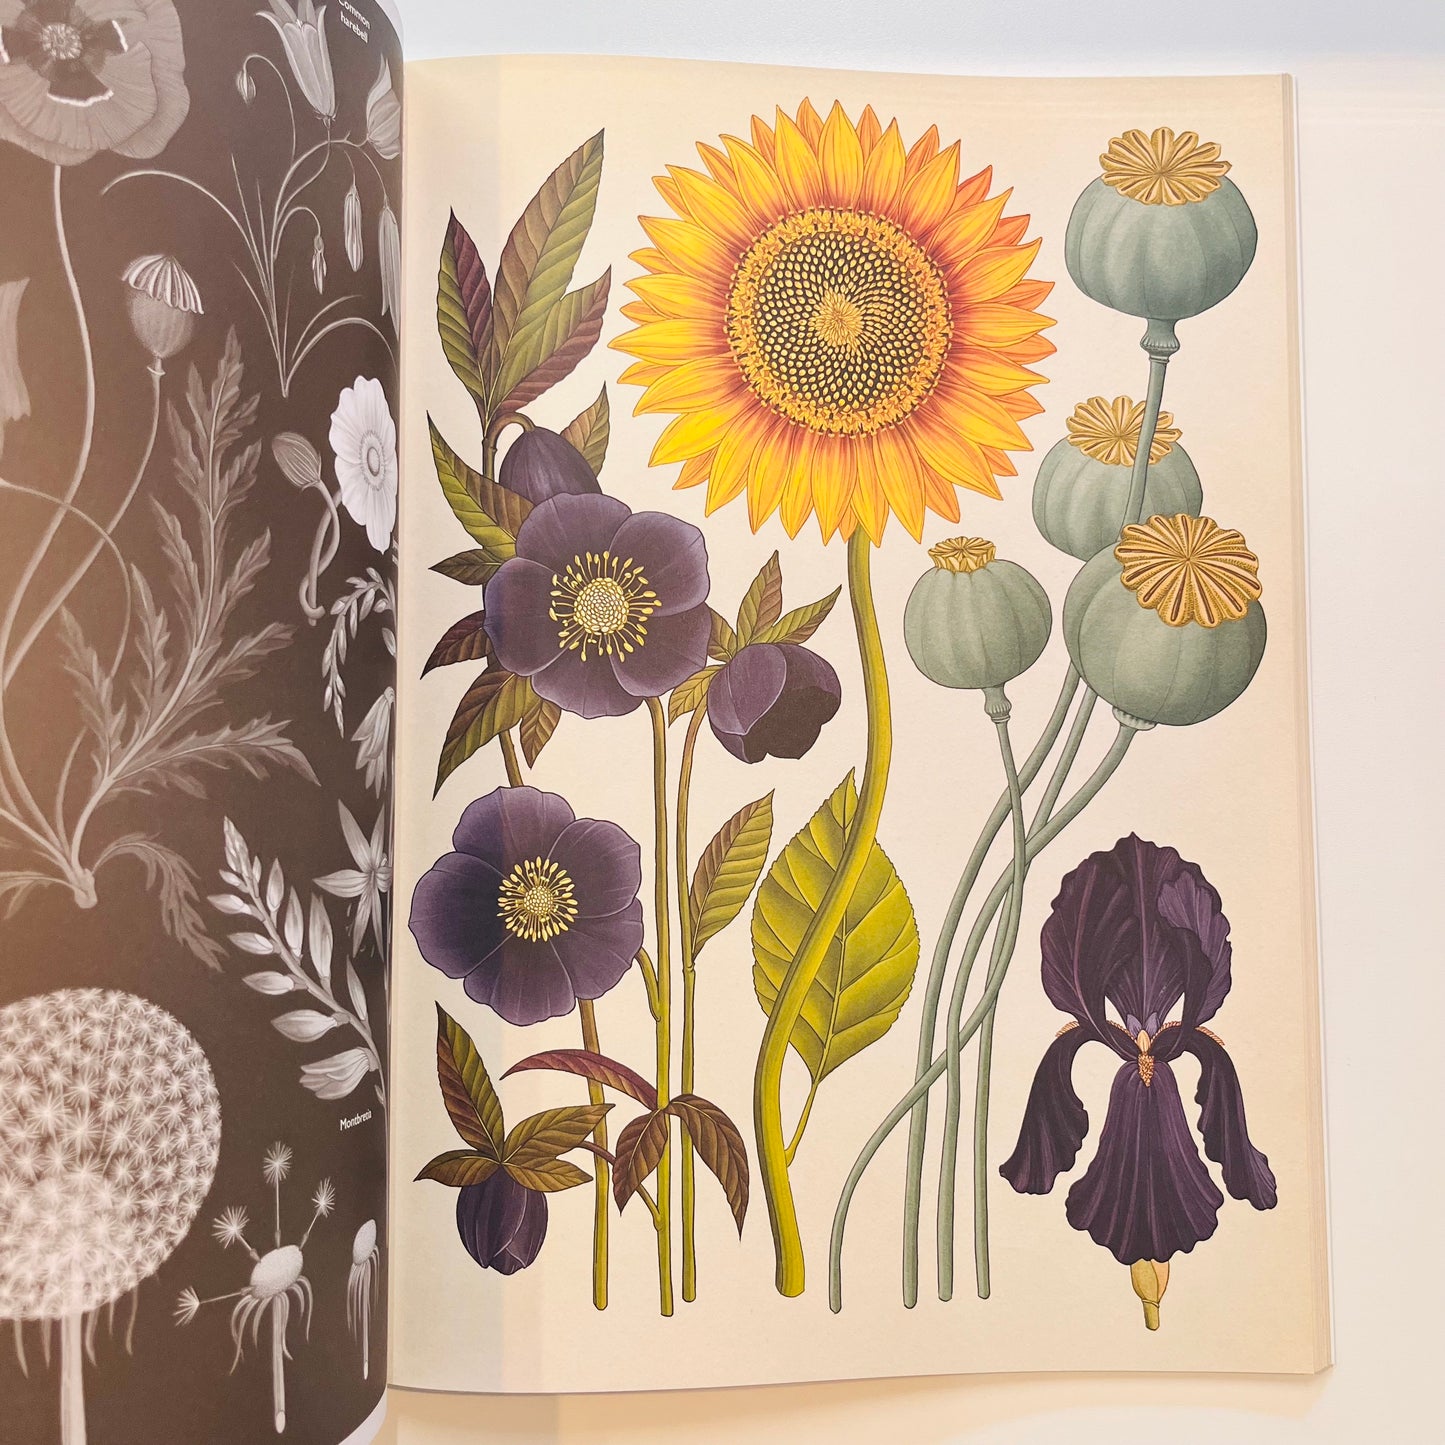 Welcome to the museum | Botanicum POSTER Book